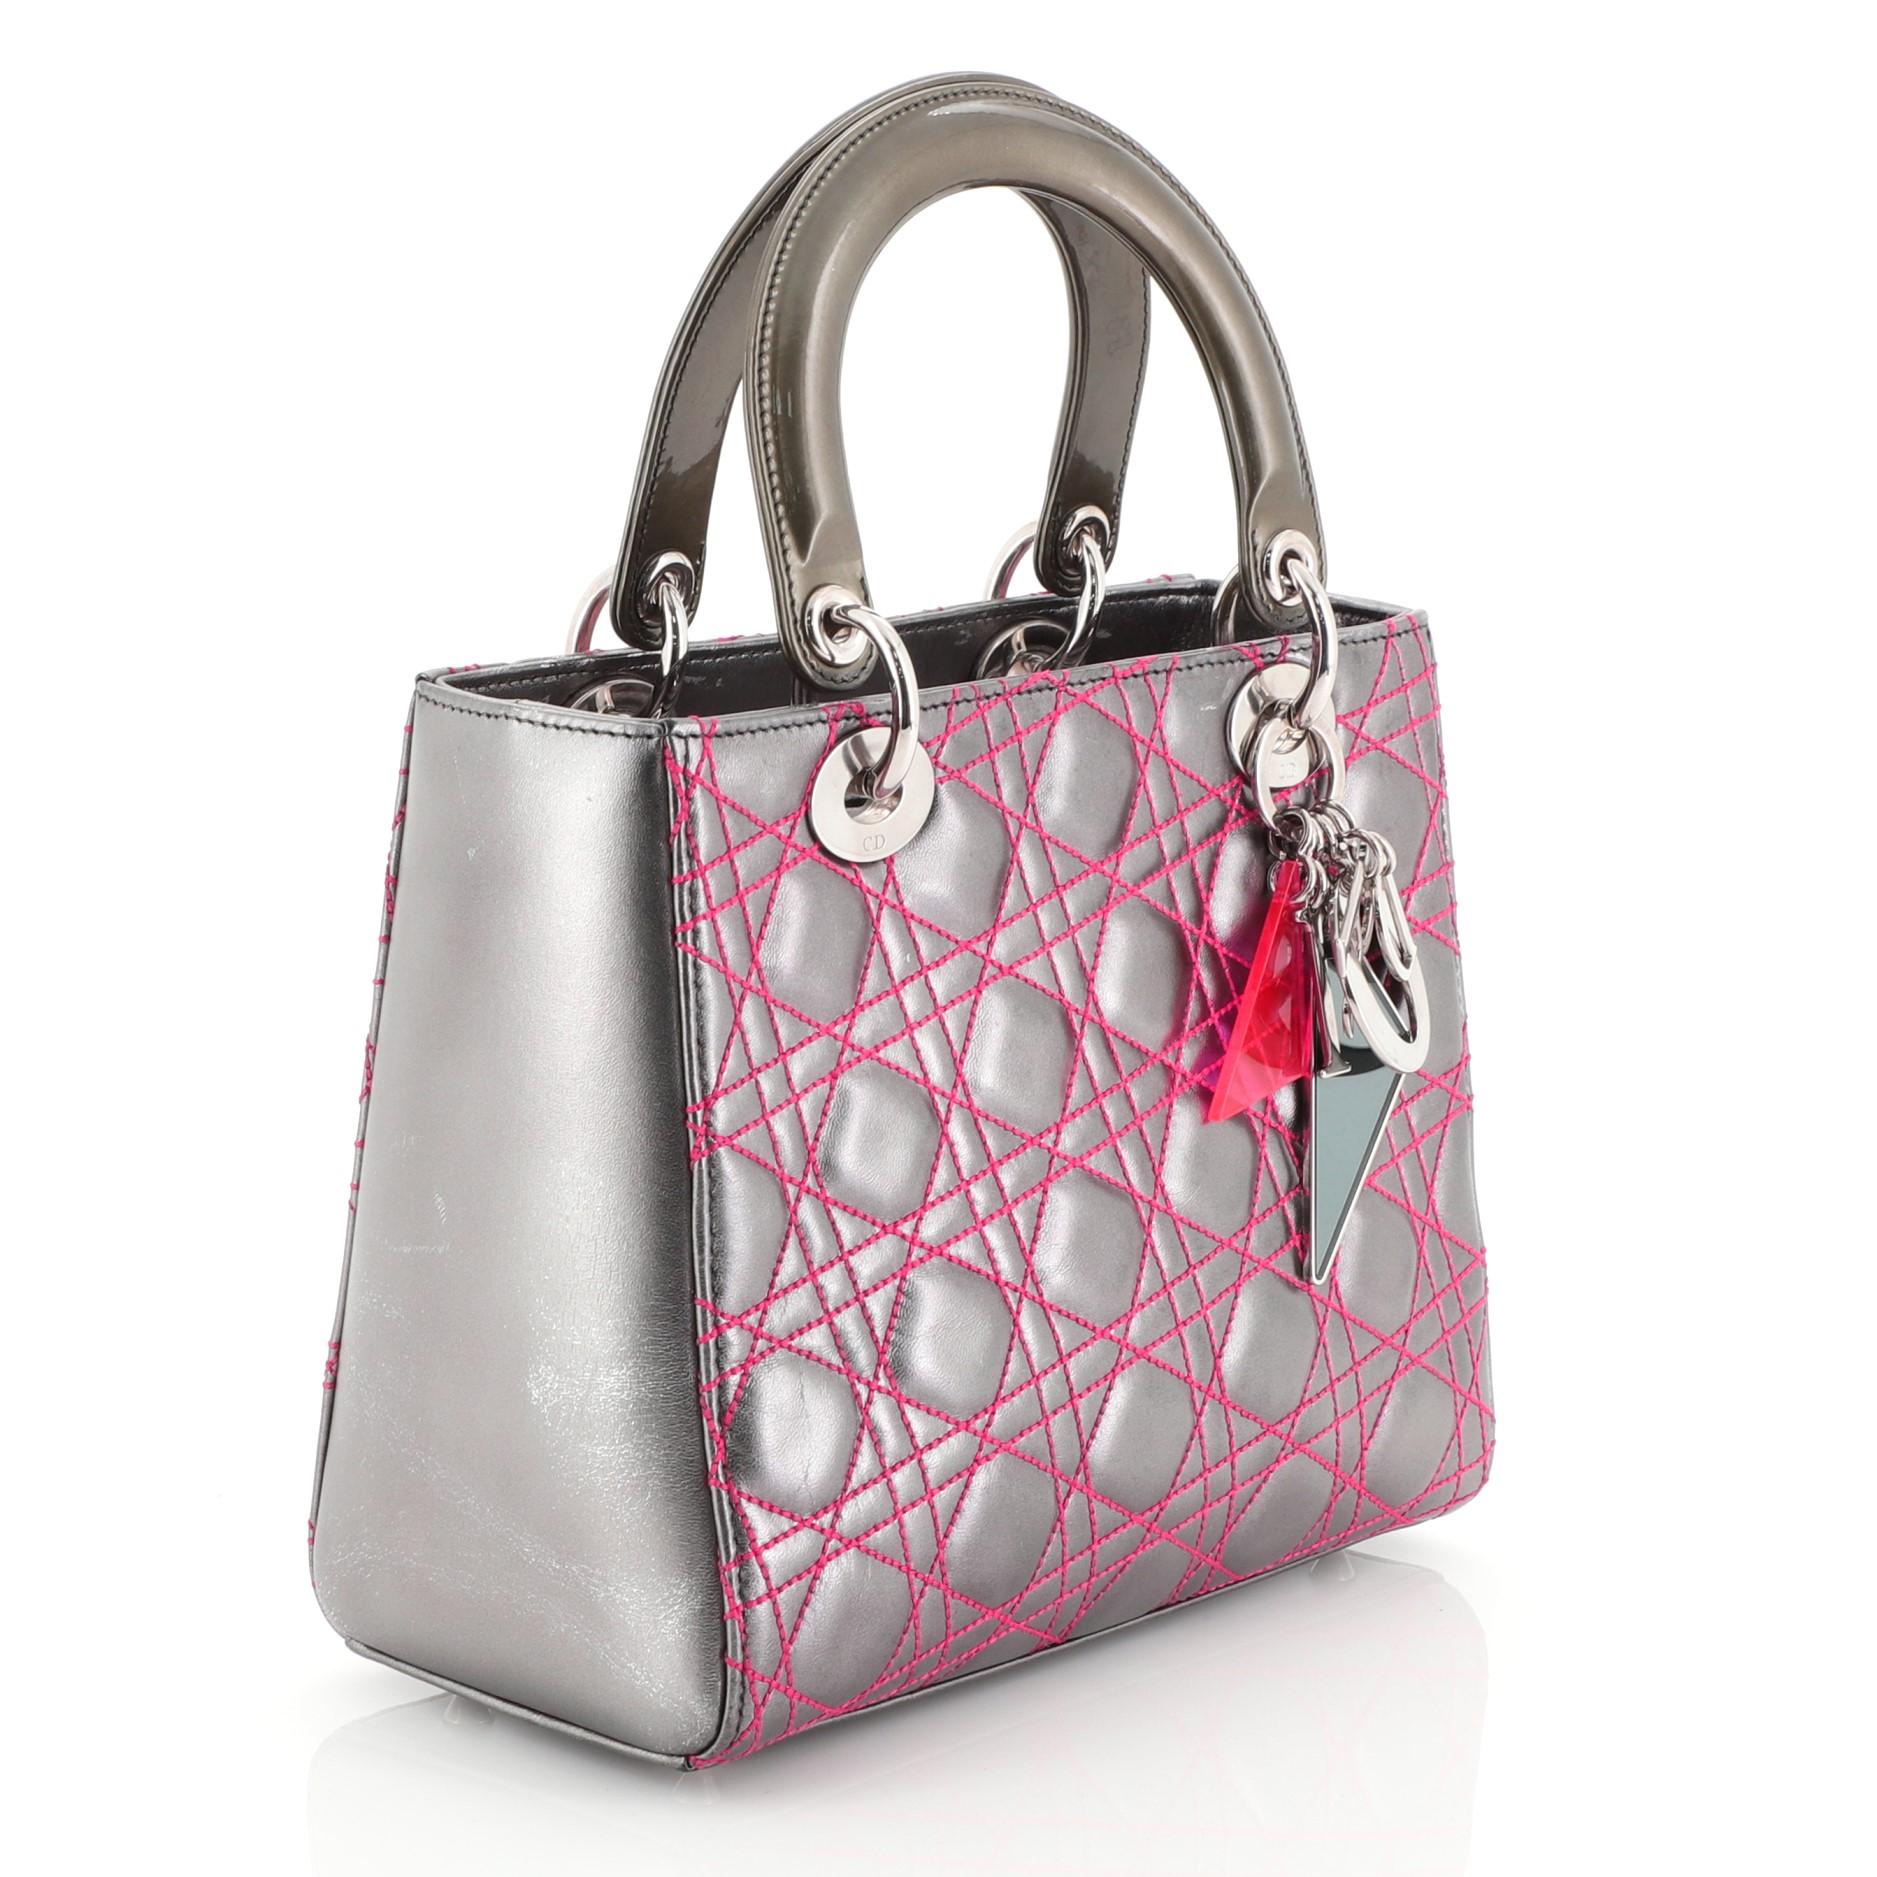 
This Christian Dior Lady Dior Handbag Anselm Reyle Cannage Quilt Leather Medium, crafted from multicolor silver cannage quilt leather, features smooth short dual handles with colorful triangular Dior charms, and silver tone hardware. Its zip lock